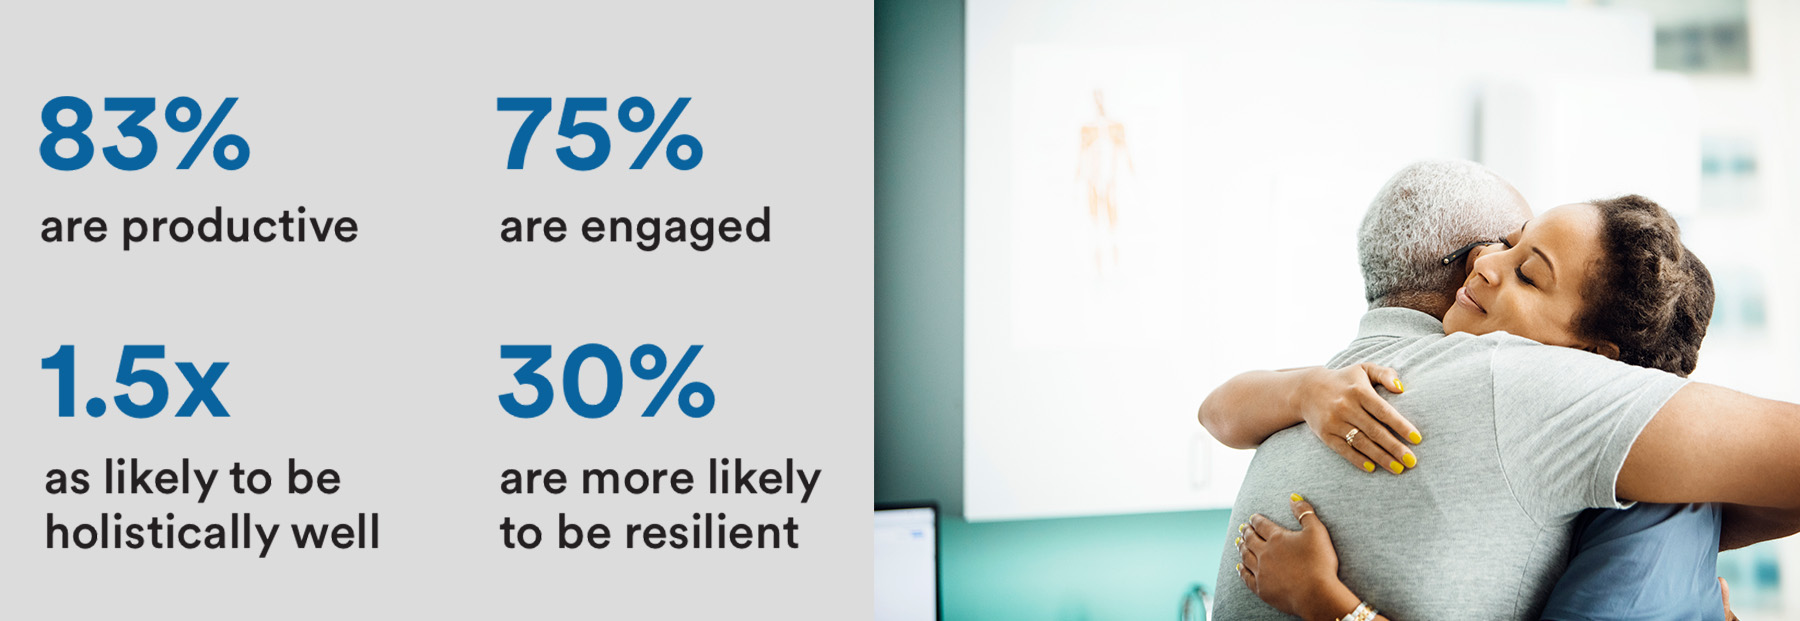 (EBTS Healthcare Infographic) Stats: 83% are productive, 75% are engaged, 1.5x as likely to be holistically well, 30% are more likely to be resilient.